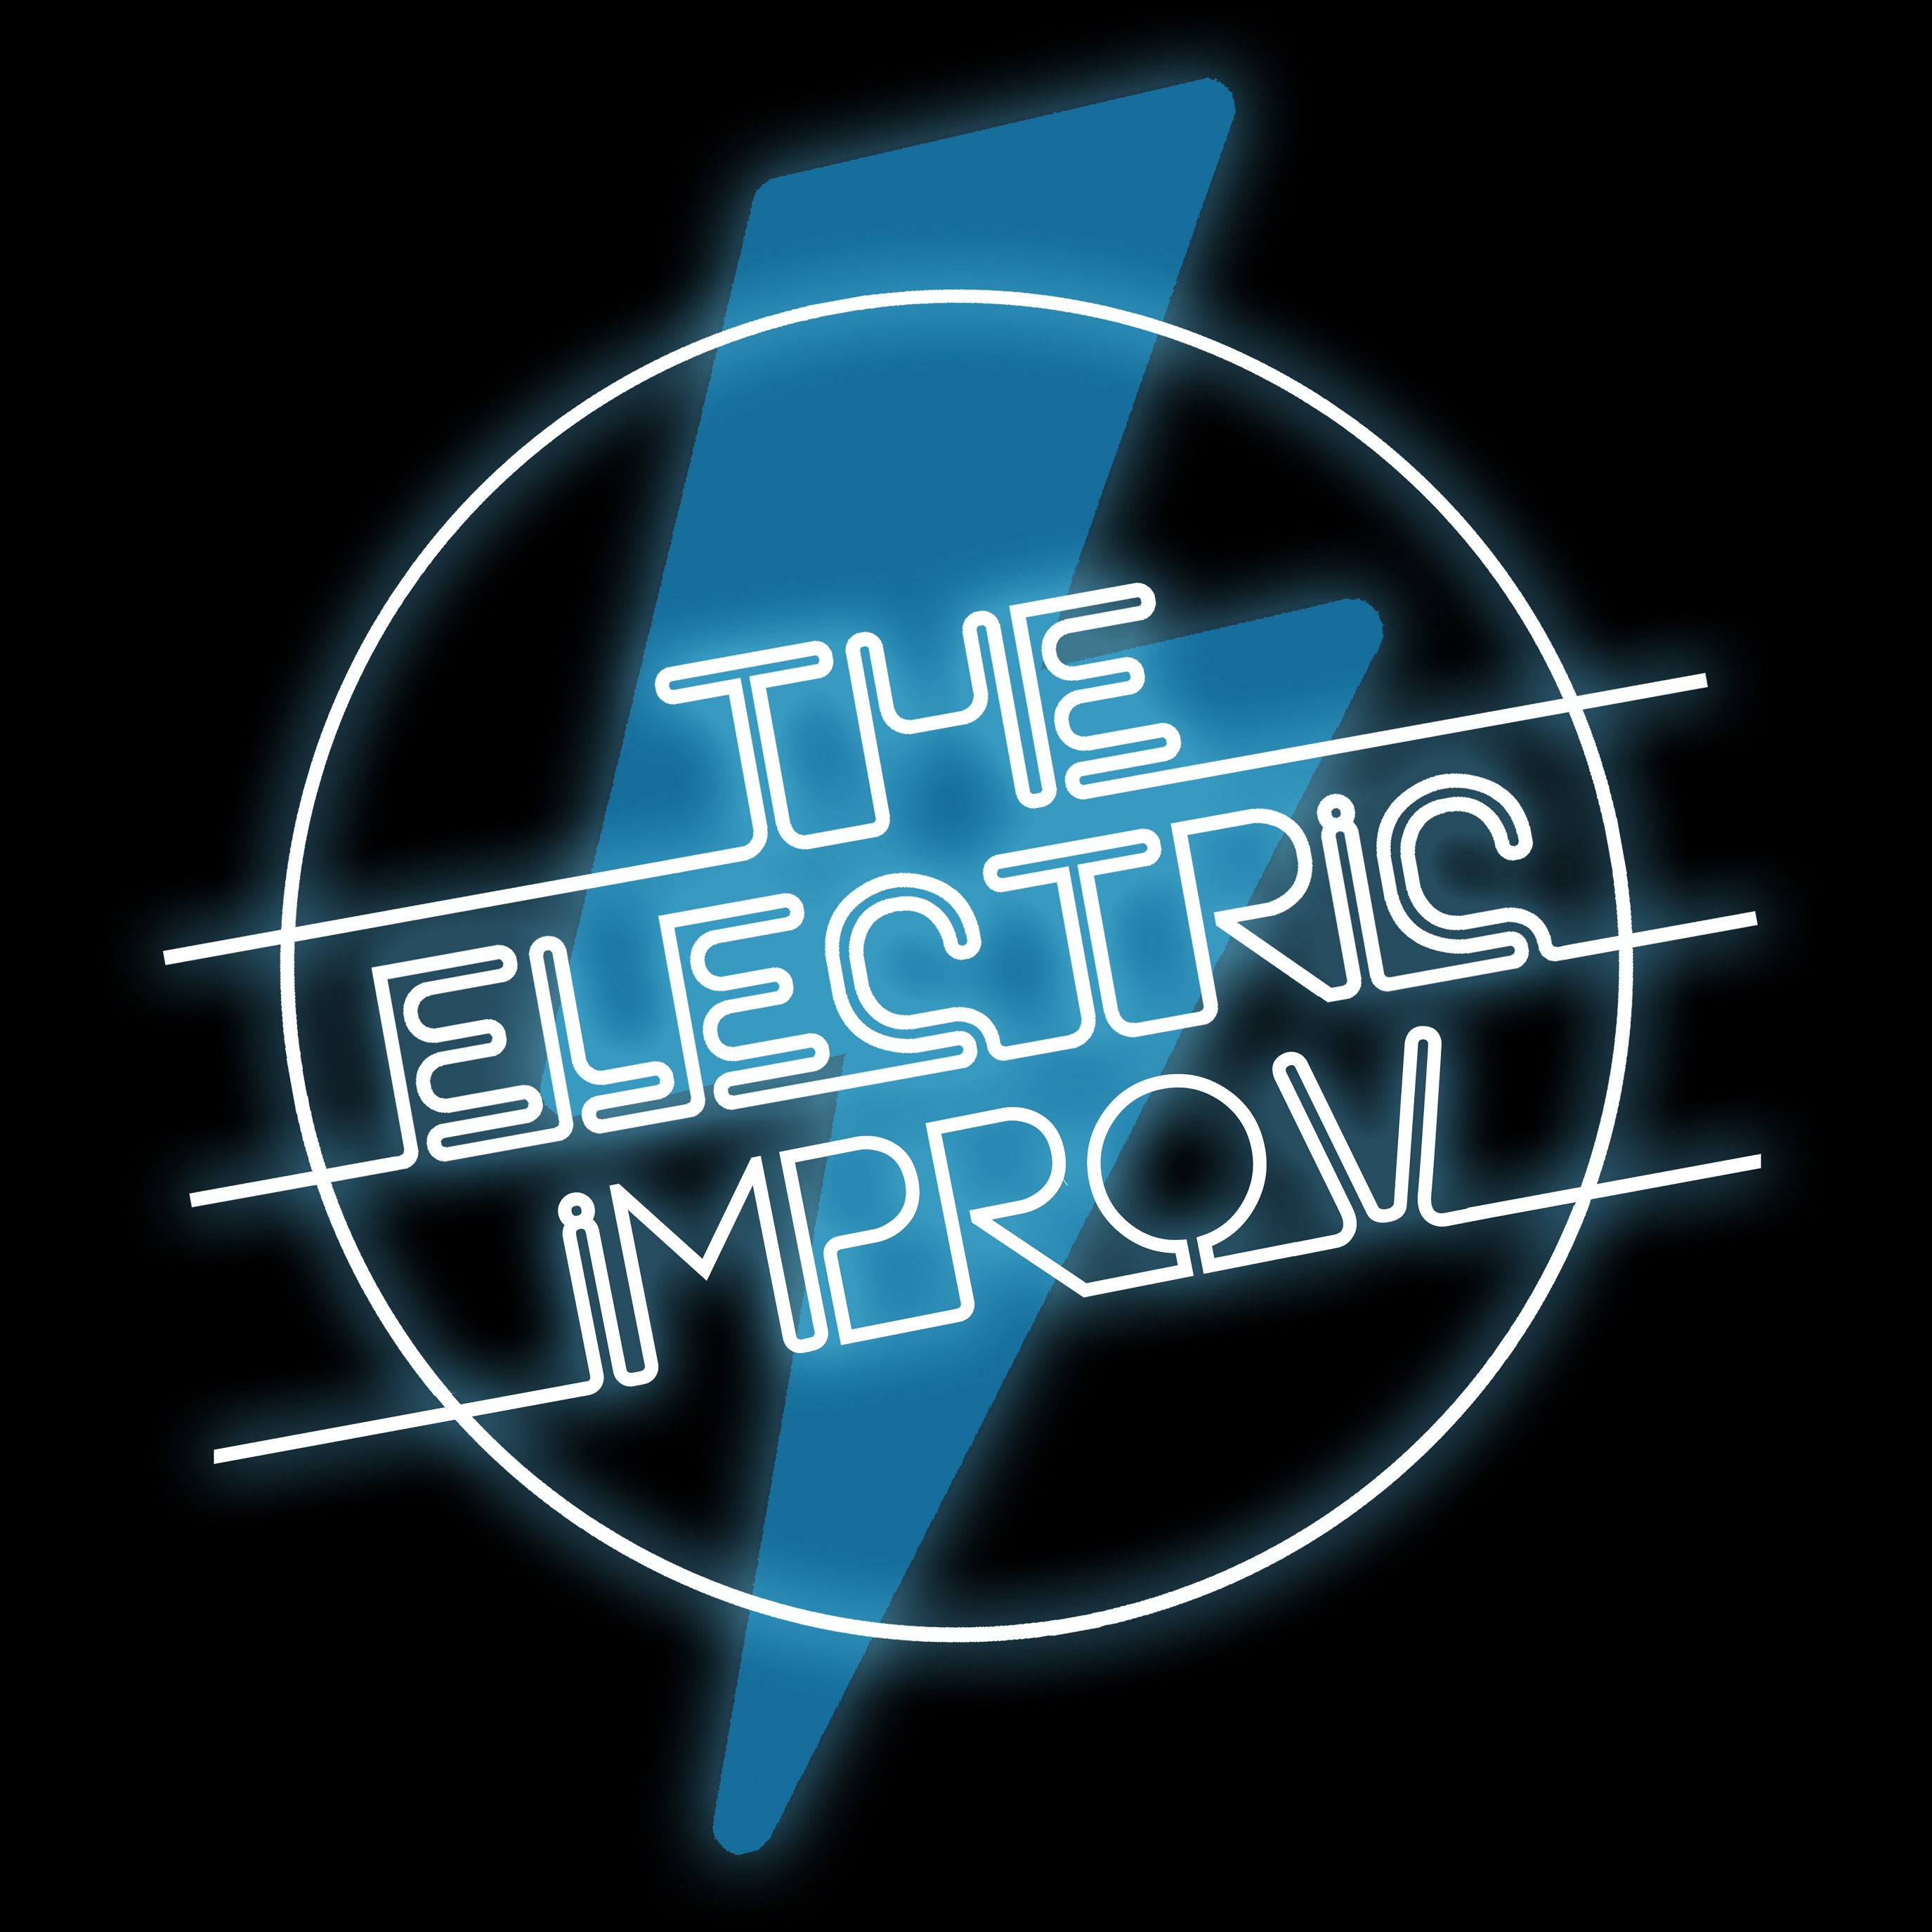 The Electric Improv